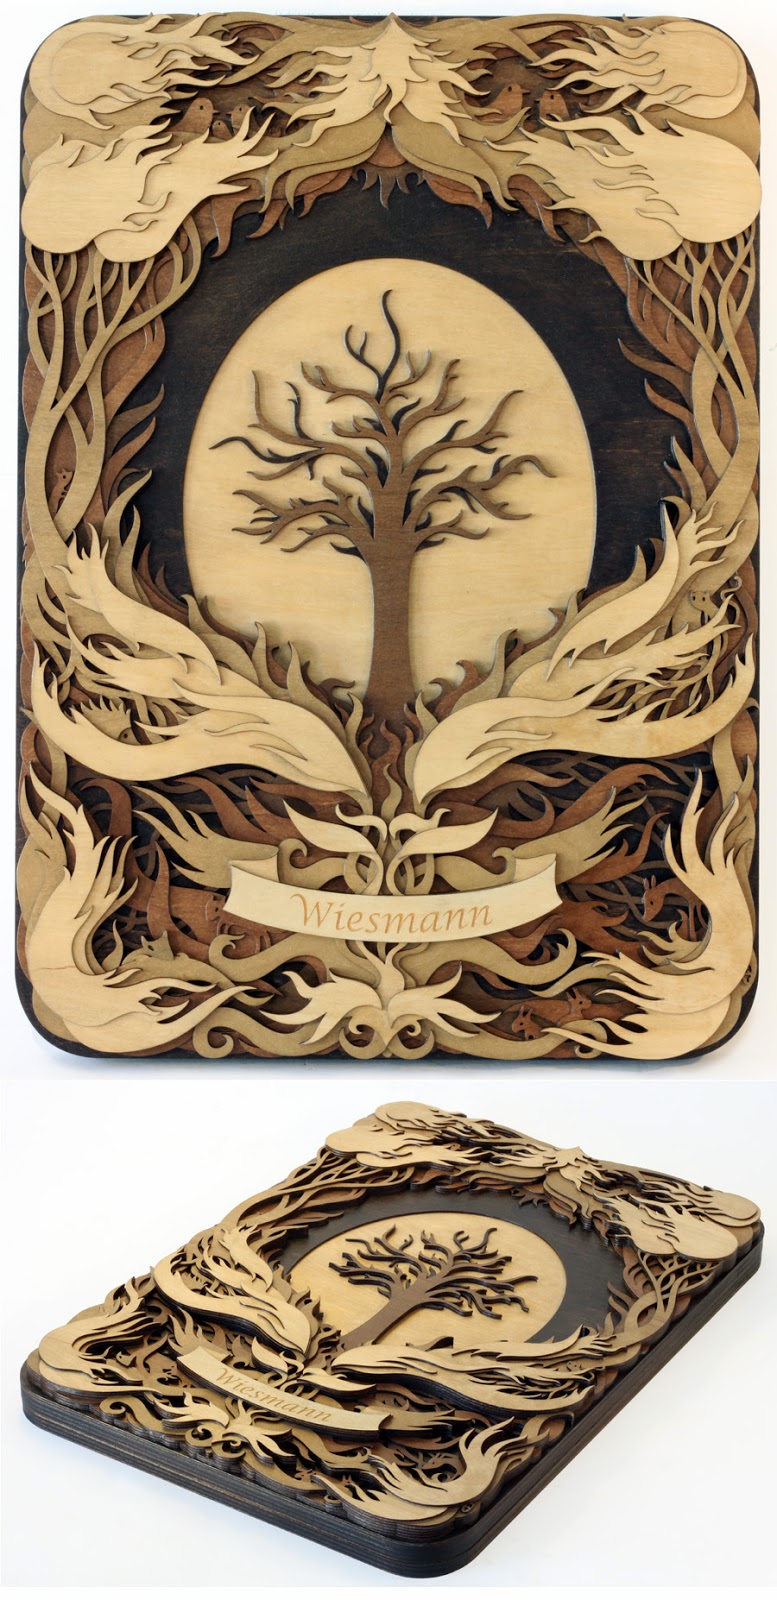 Simply Creative: Laser Cut Wood Illustrations by Martin Tomsky